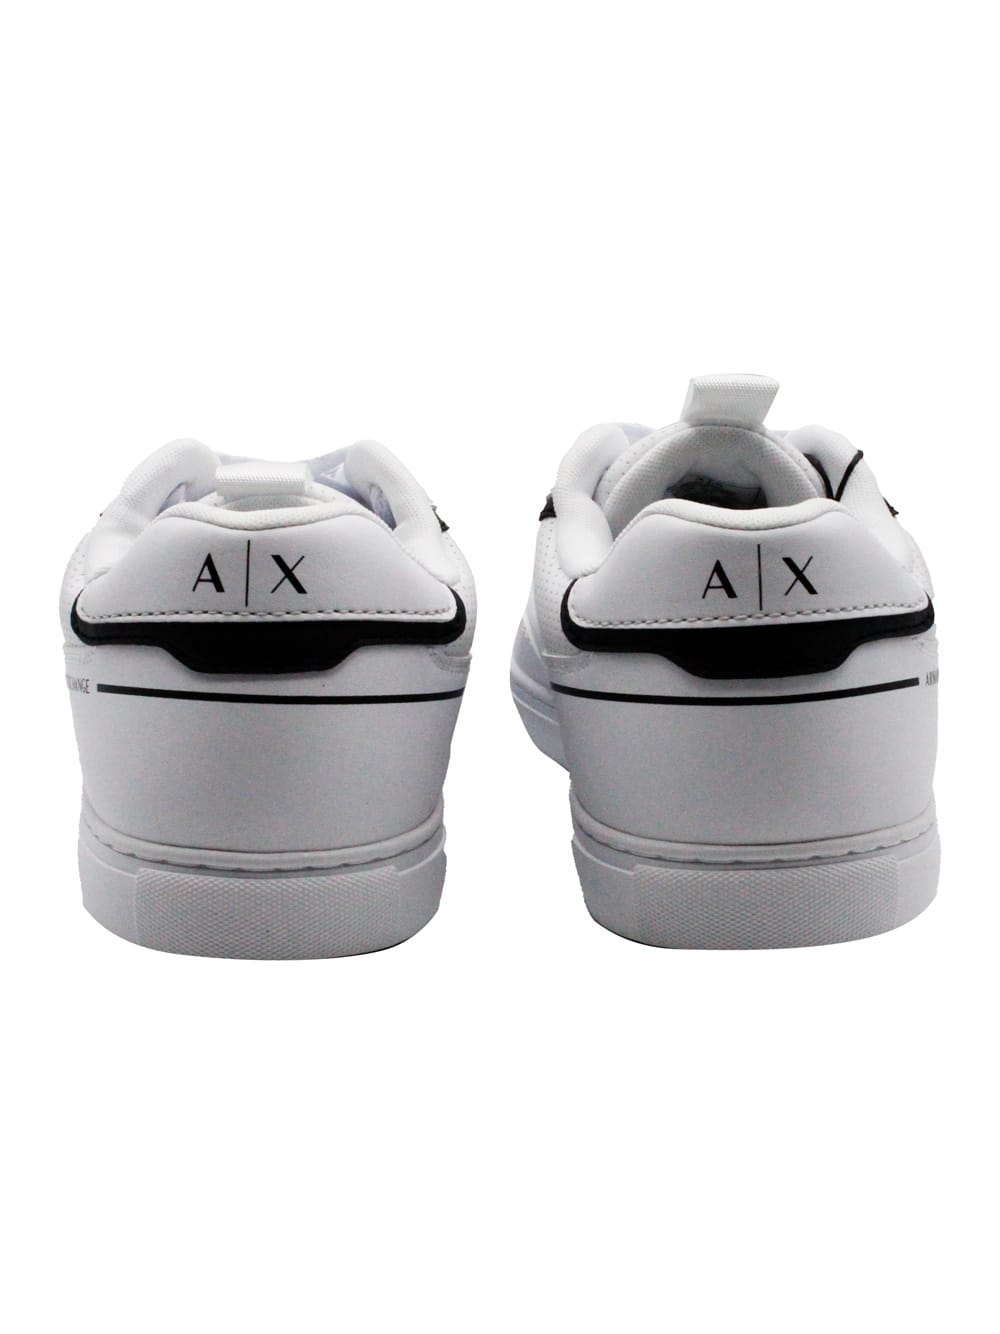 Shop Armani Collezioni Sneakers In Soft Perforated Leather With Matching Sole And Lace Closure. Rear Logo In White